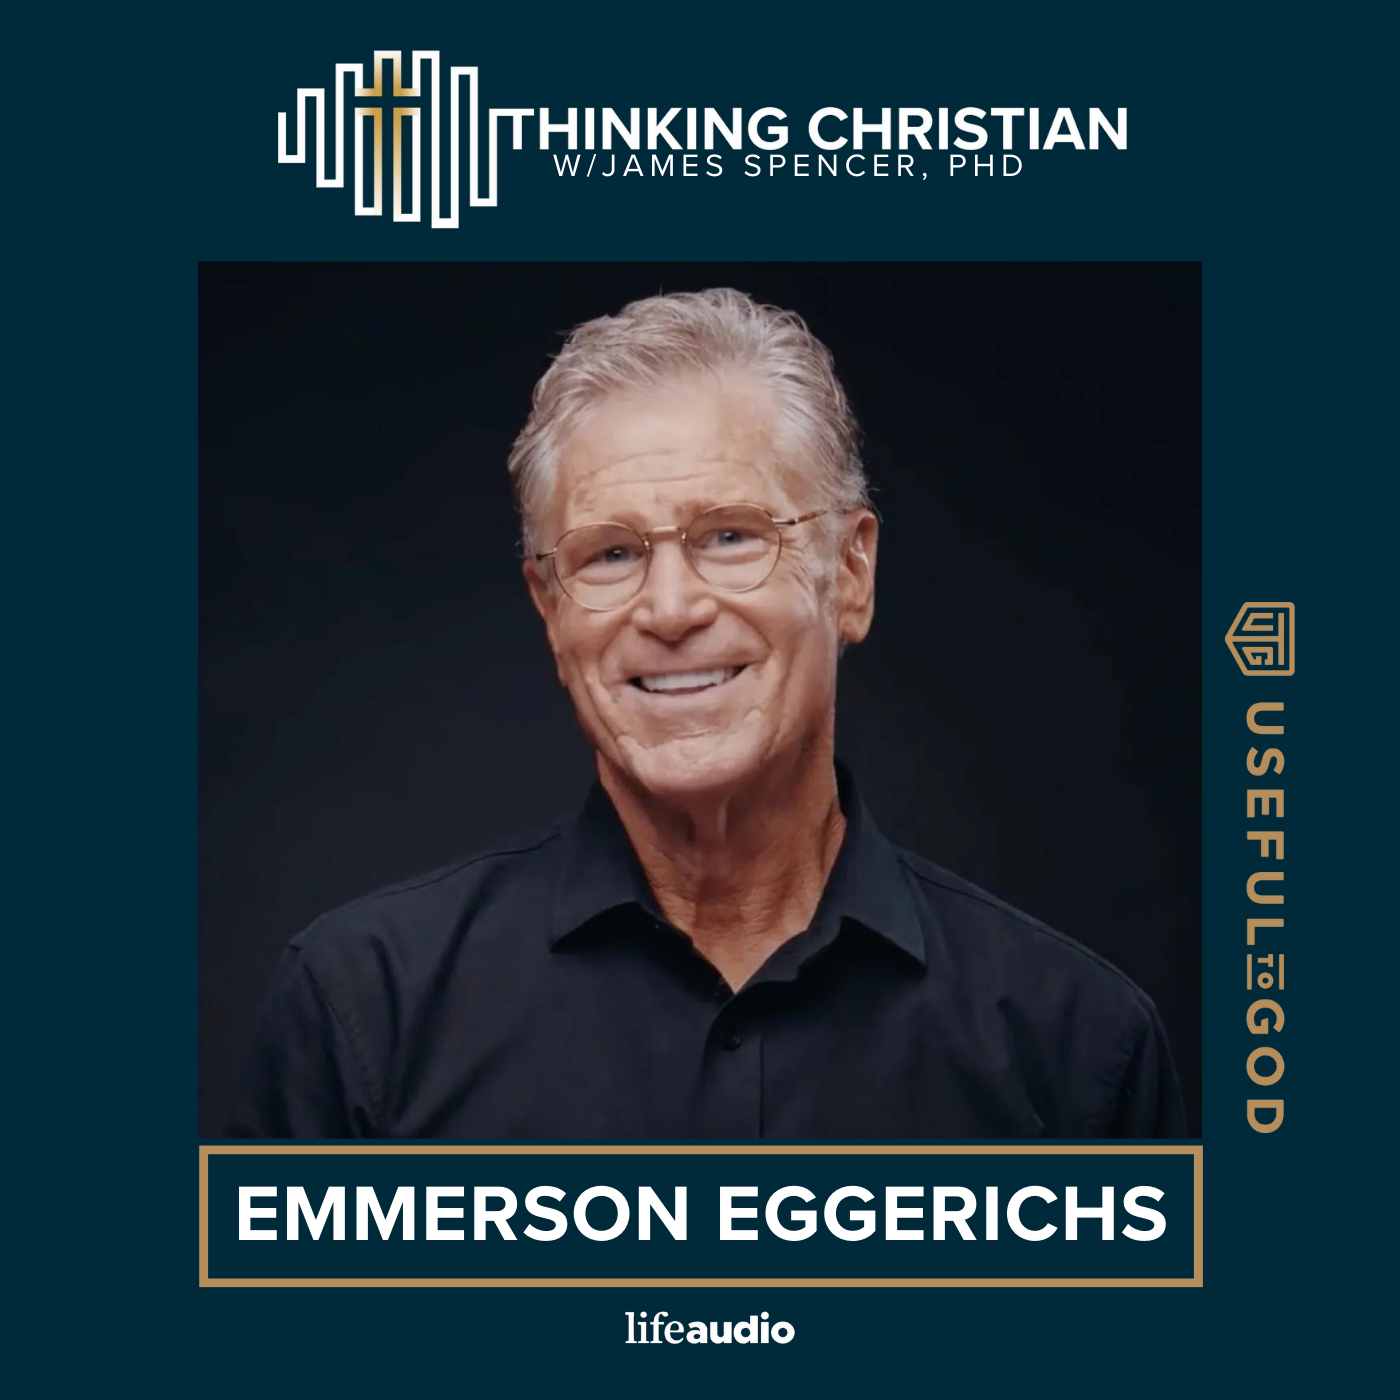 How to Improve Your Relationships with Love and Respect: A Conversation with Emerson Eggerichs